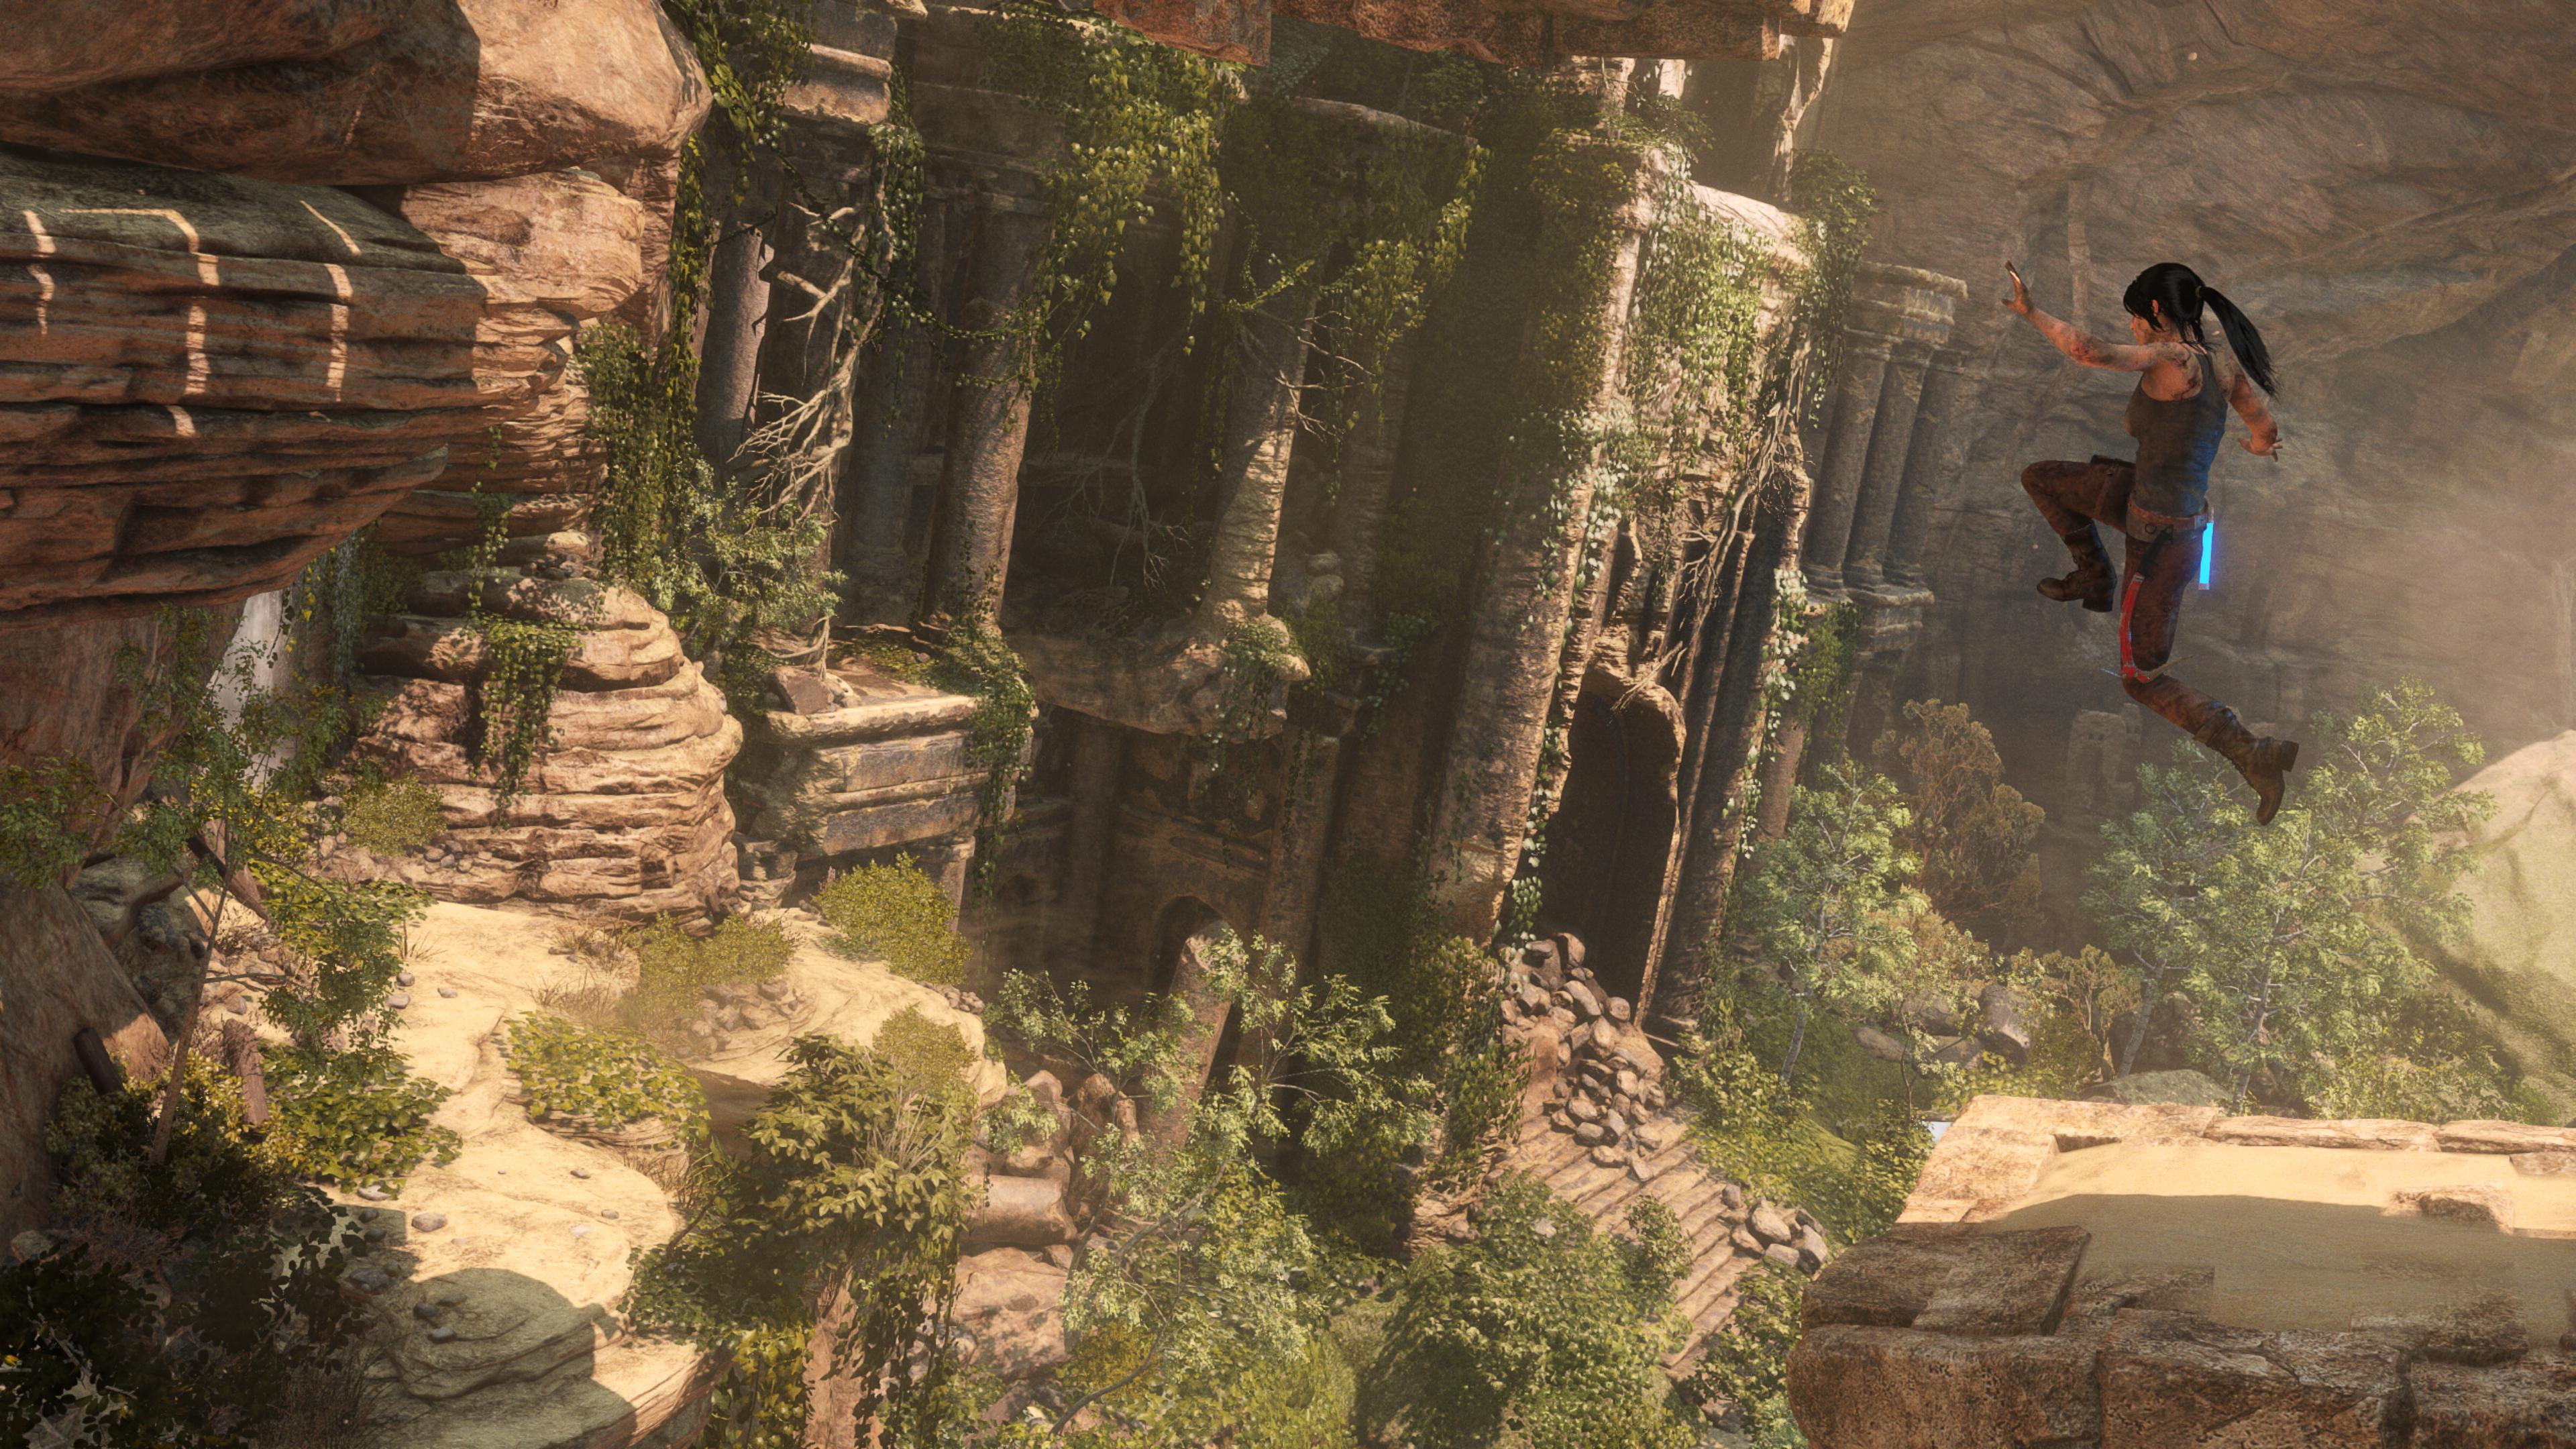 Media asset in full size related to 3dfxzone.it news item entitled as follows: Rise of the Tomb Raider disponibile su PC a partire dal 28 gennaio | Image Name: news23603_Rise-of-the-Tomb-Raider-Screenshot_6.jpg